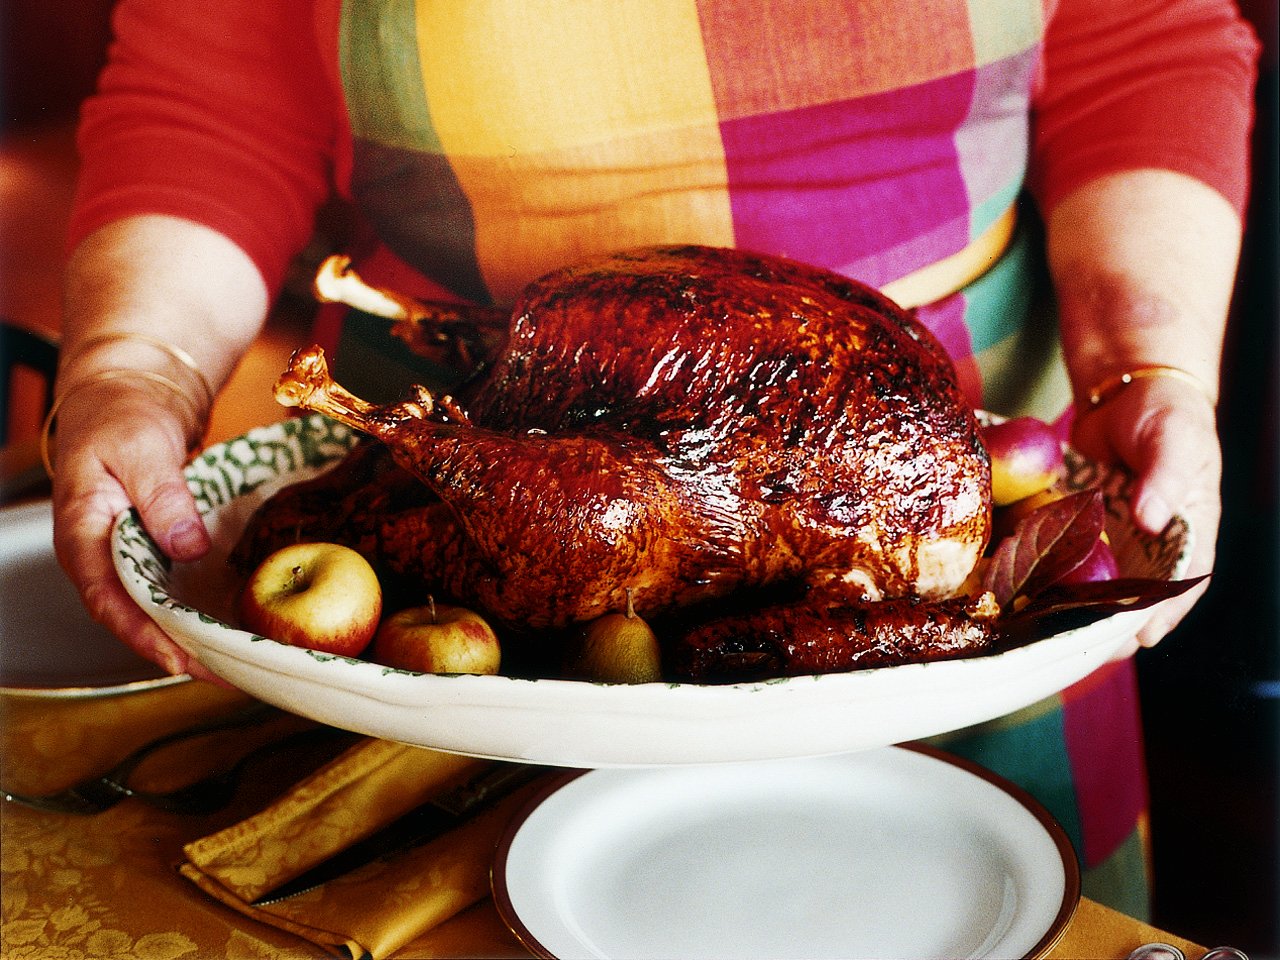 How To Cook The Perfect Turkey: Tips From A Chef - CBS Detroit